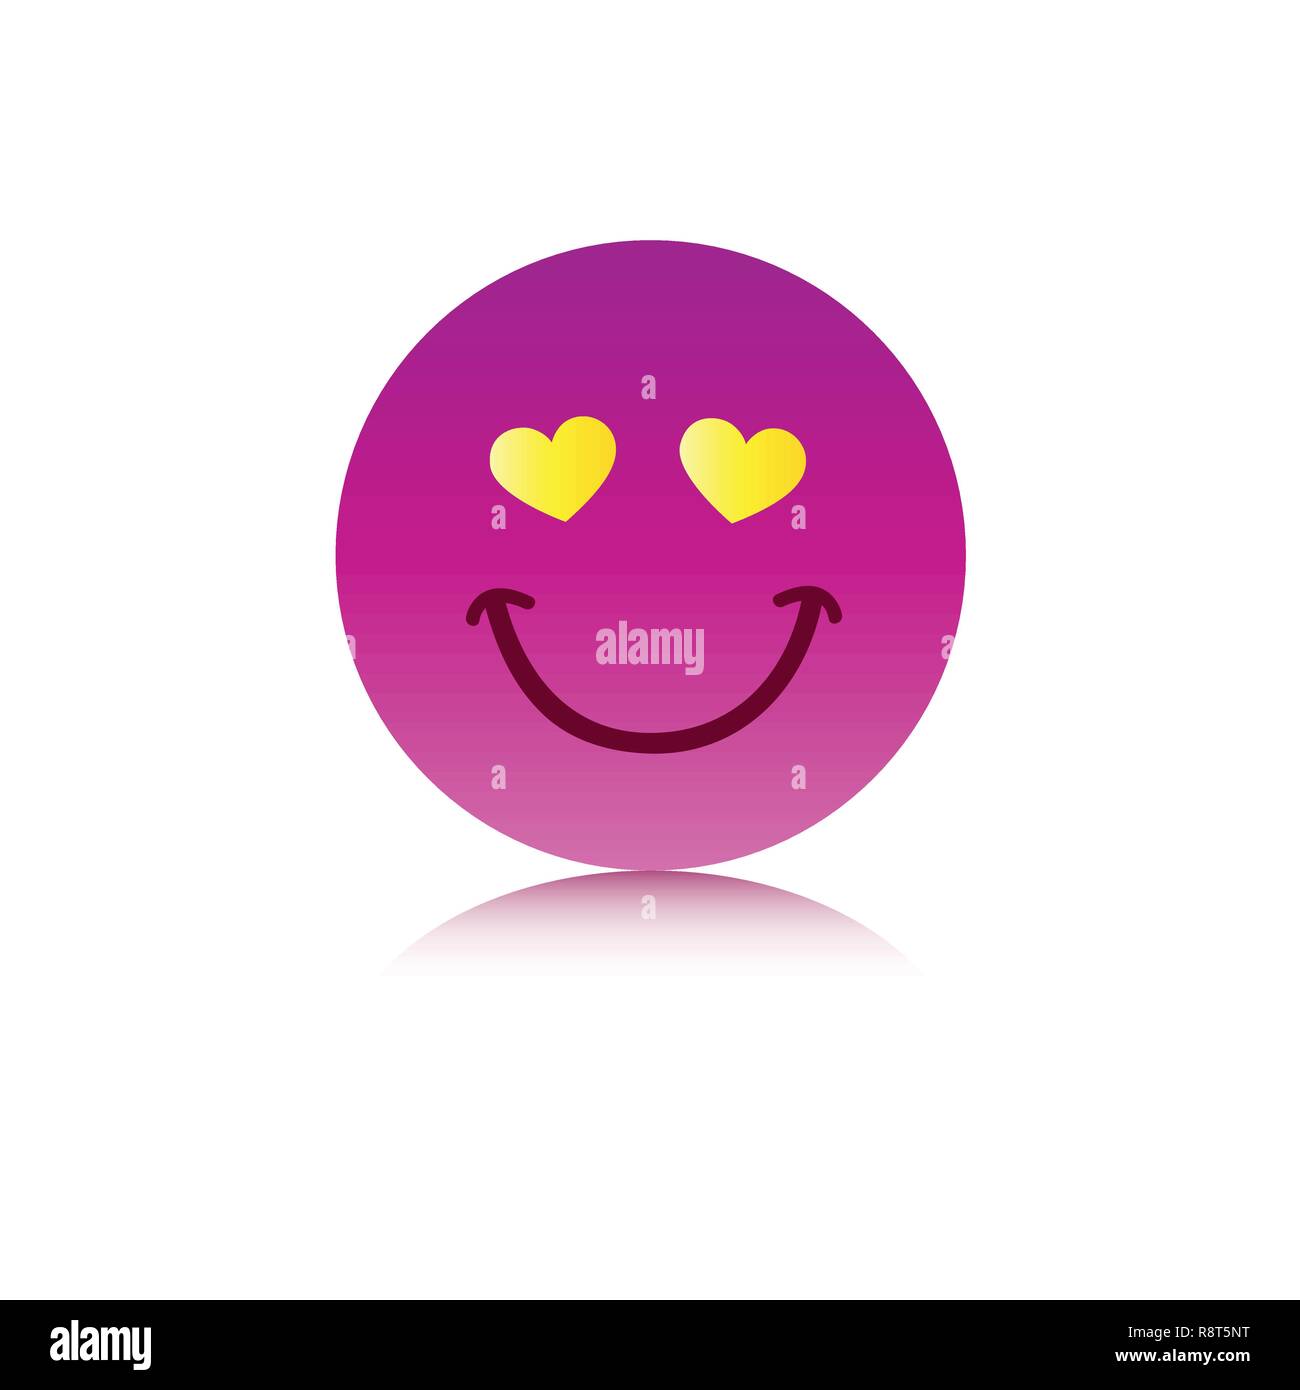 happy pink emoji face with hearts as eyes on white background vector illustration EPS10 Stock Vector